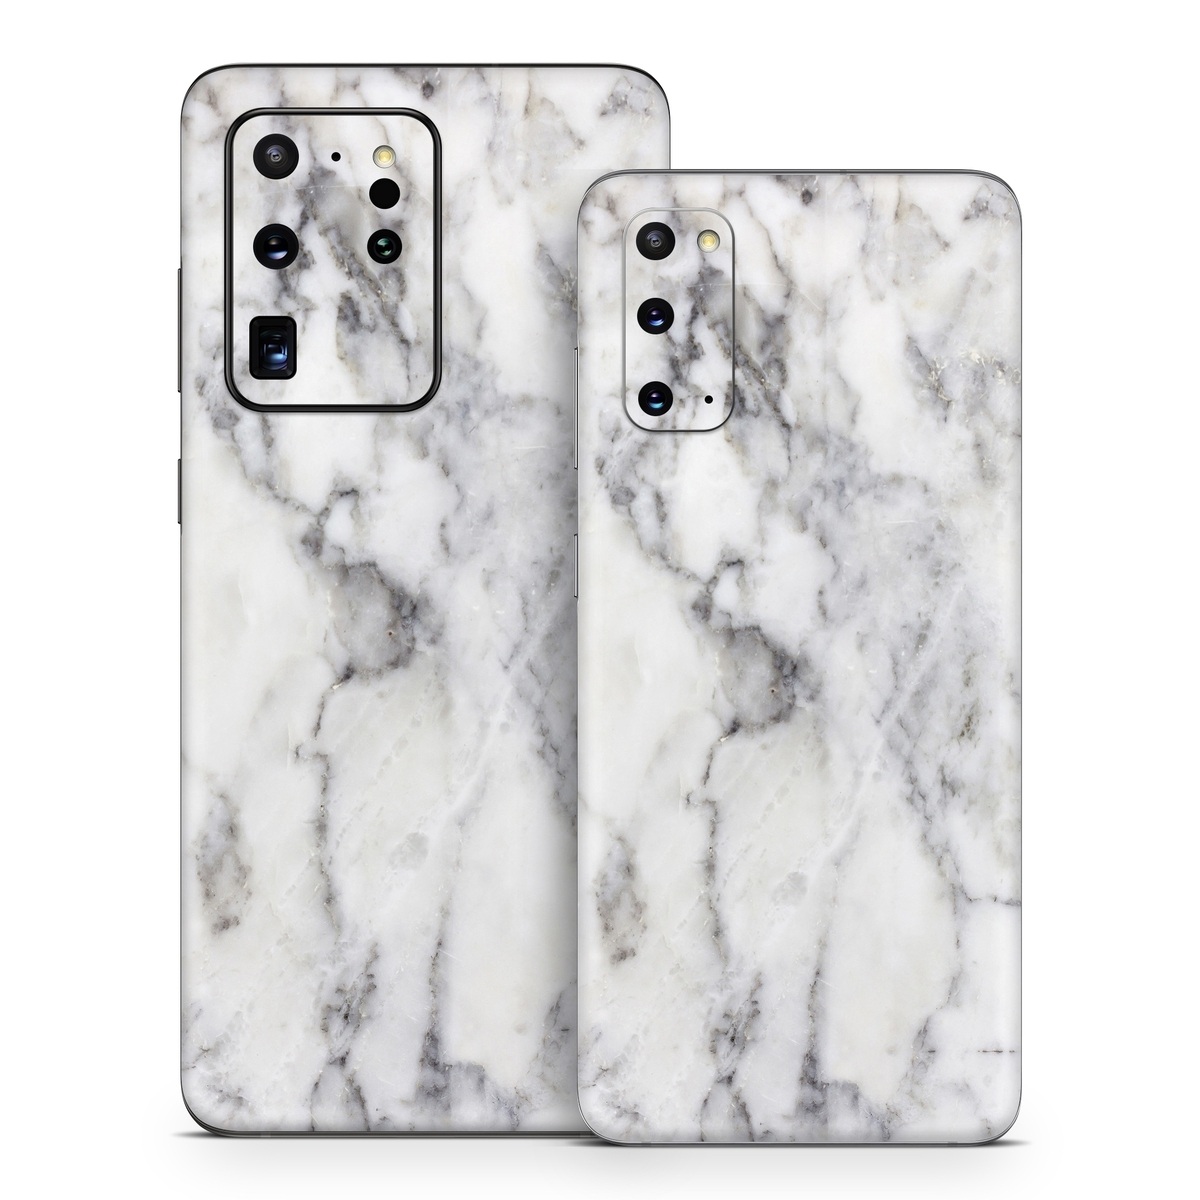 Samsung Galaxy S20 Series Skin design of White, Geological phenomenon, Marble, Black-and-white, Freezing, with white, black, gray colors